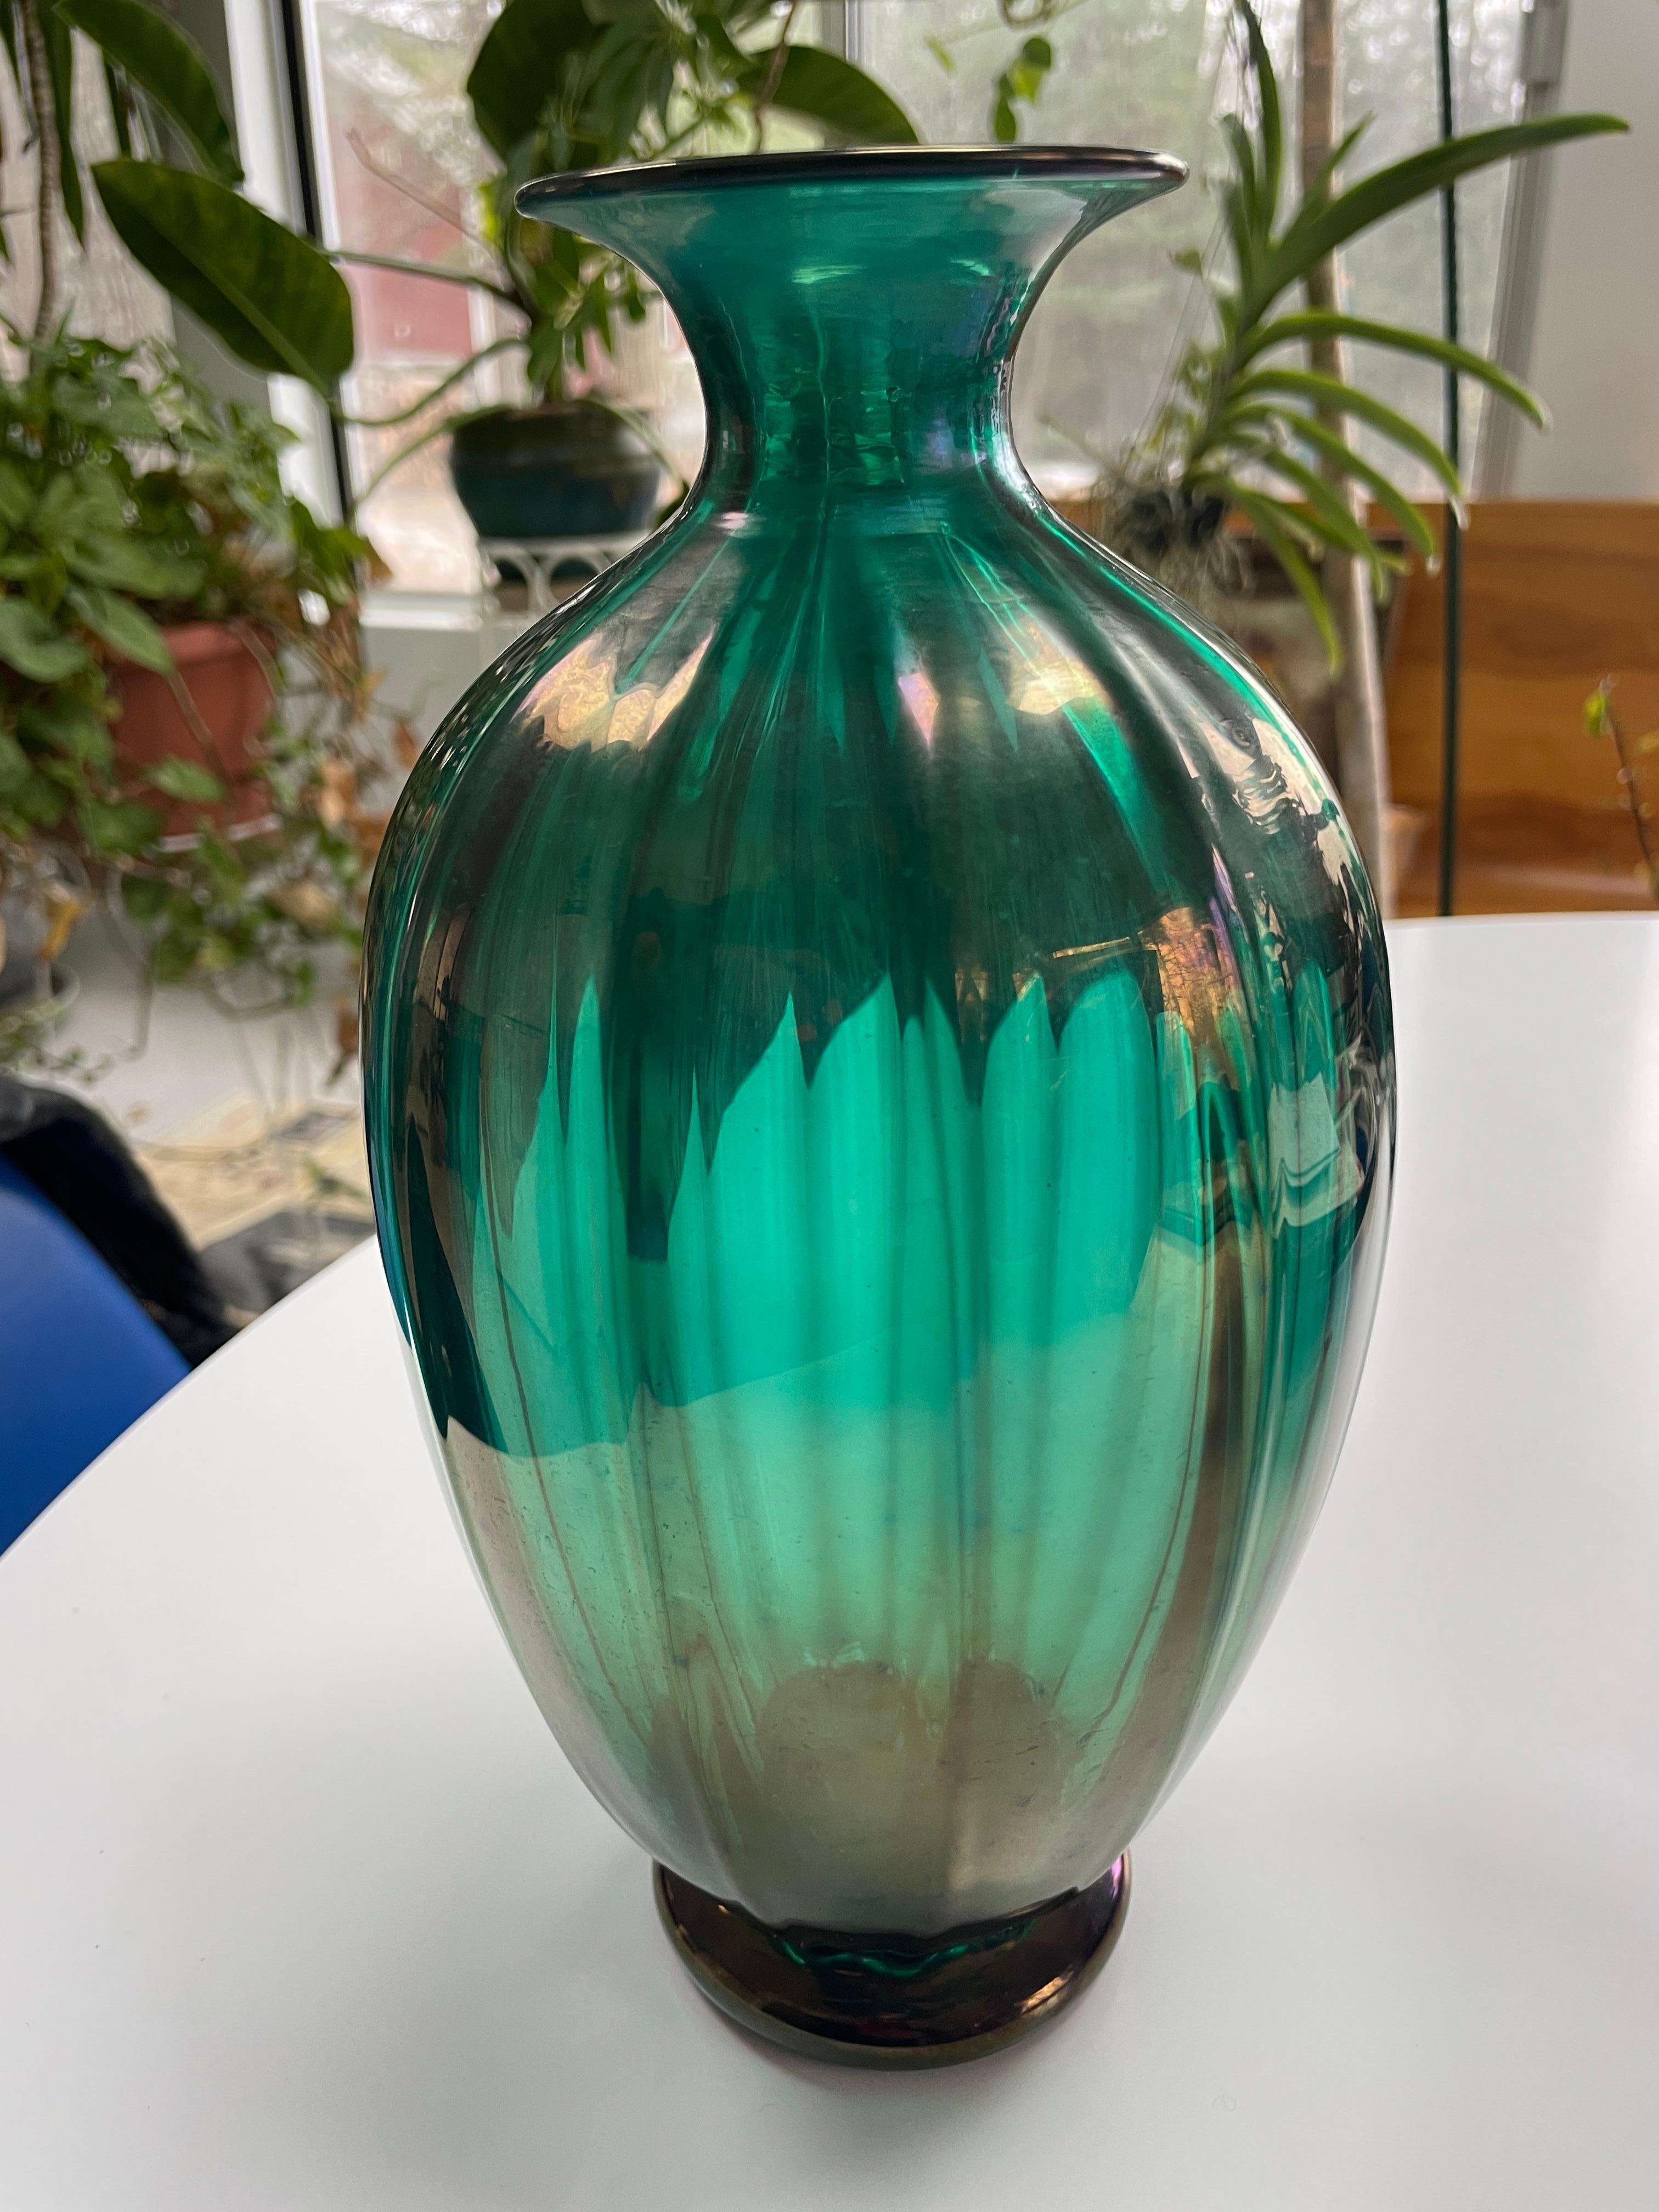 Archimede Seguso Vase, Green Glass with Iridescence, Serenella Signed  In Good Condition For Sale In Wallkill, NY